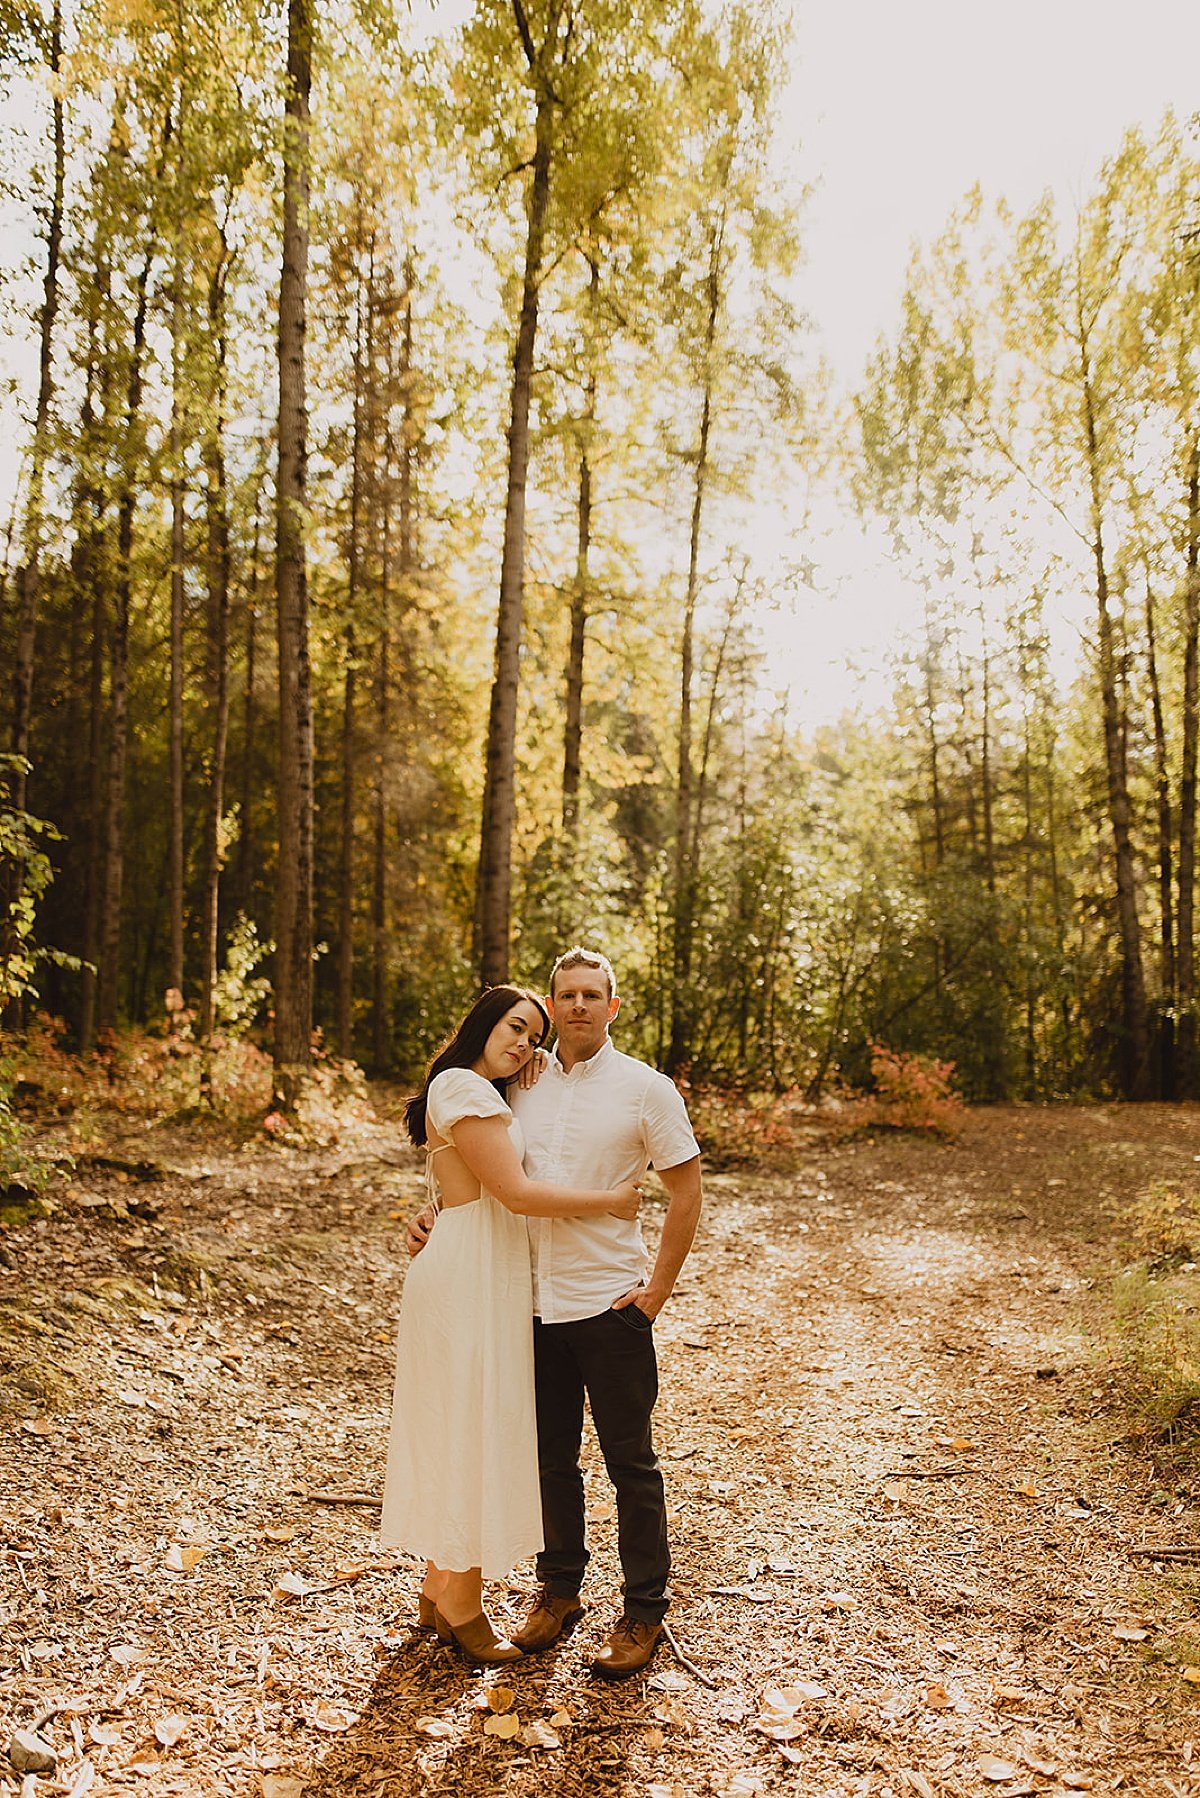  Couple embrace in woodsy engagement shoot during golden hour 